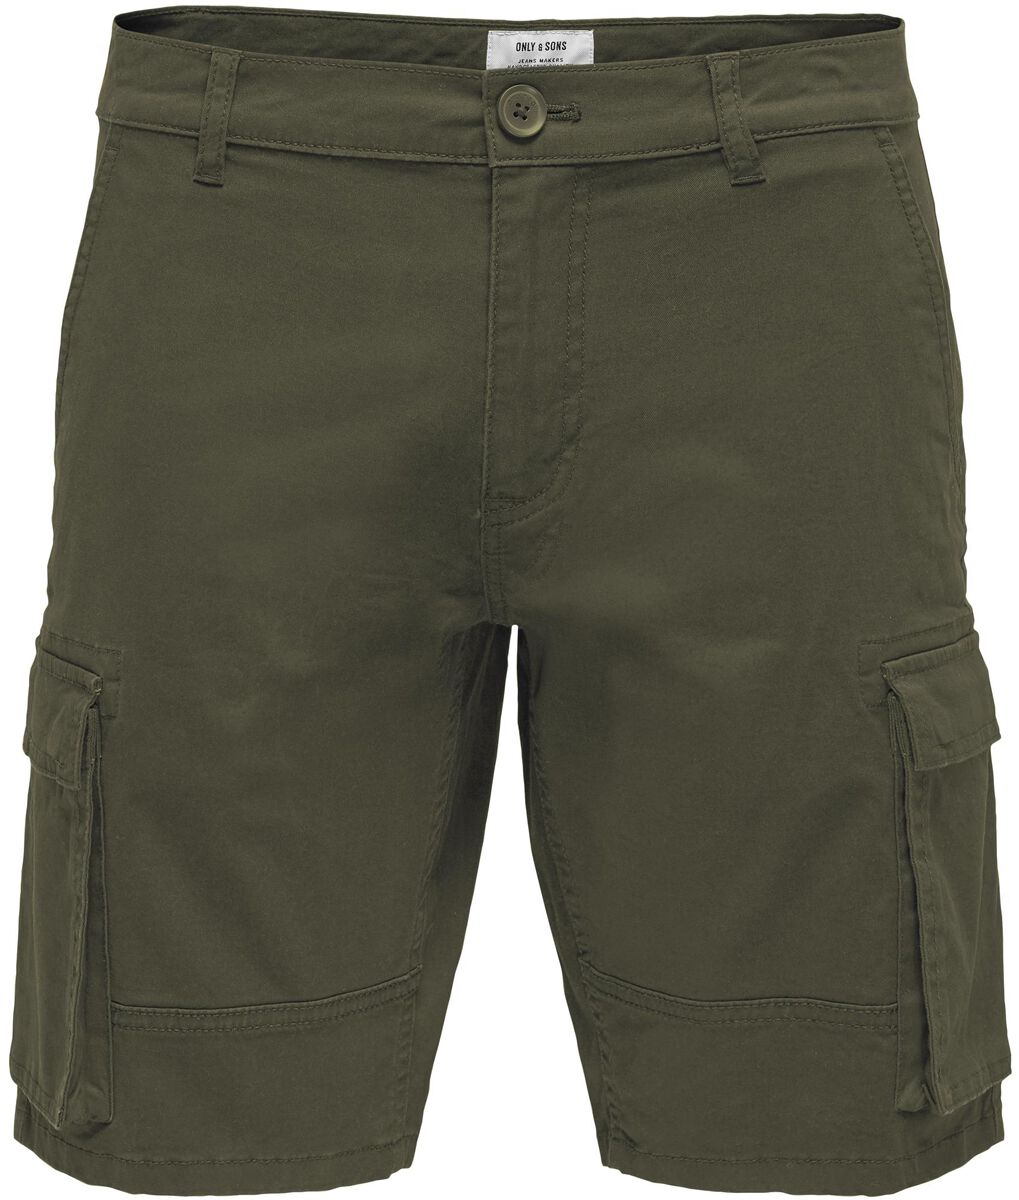 Image of Shorts di ONLY and SONS - ONSCam Stage Cargo Shorts PK 6689 - S a XXL - Uomo - verde oliva